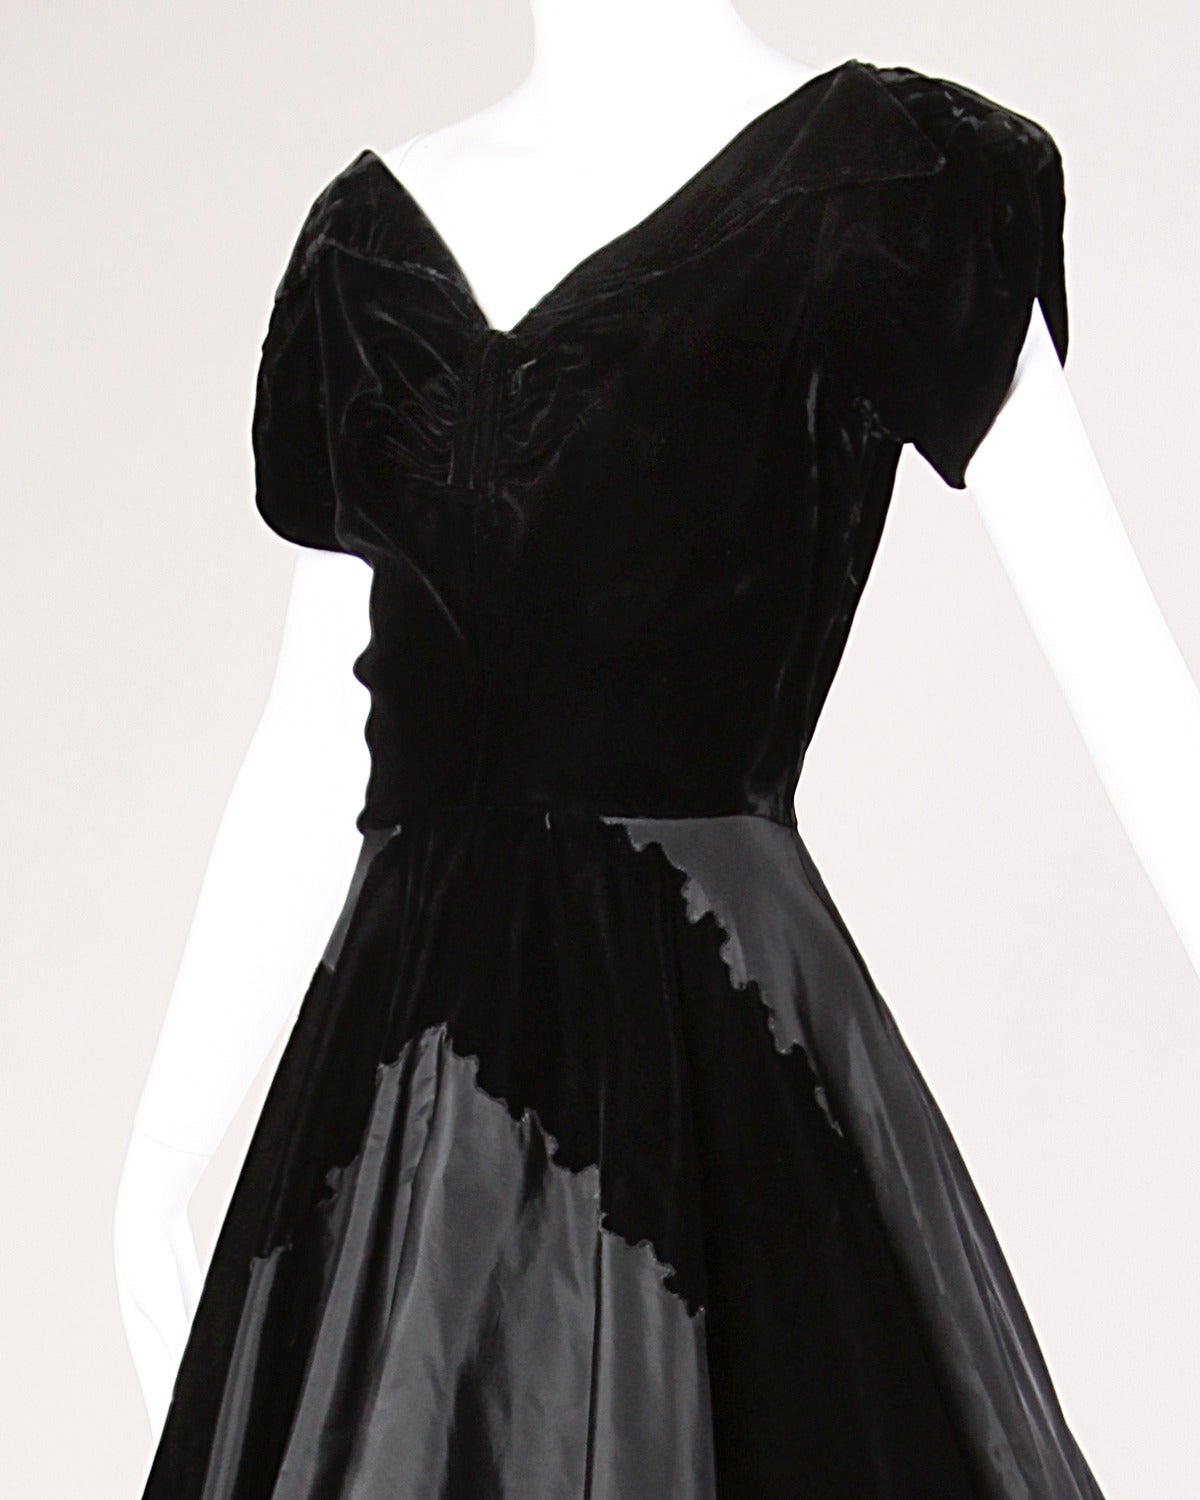 Gorgeous vintage 1950s party dress in black taffeta and velvet. Full sweep and flared skirt.

Details:

Partially Lined
Side Metal Zip Closure
Marked Size: Not Marked
Estimated Size: Medium
Color: Black
Fabric: Taffeta/ Velvet
Label: